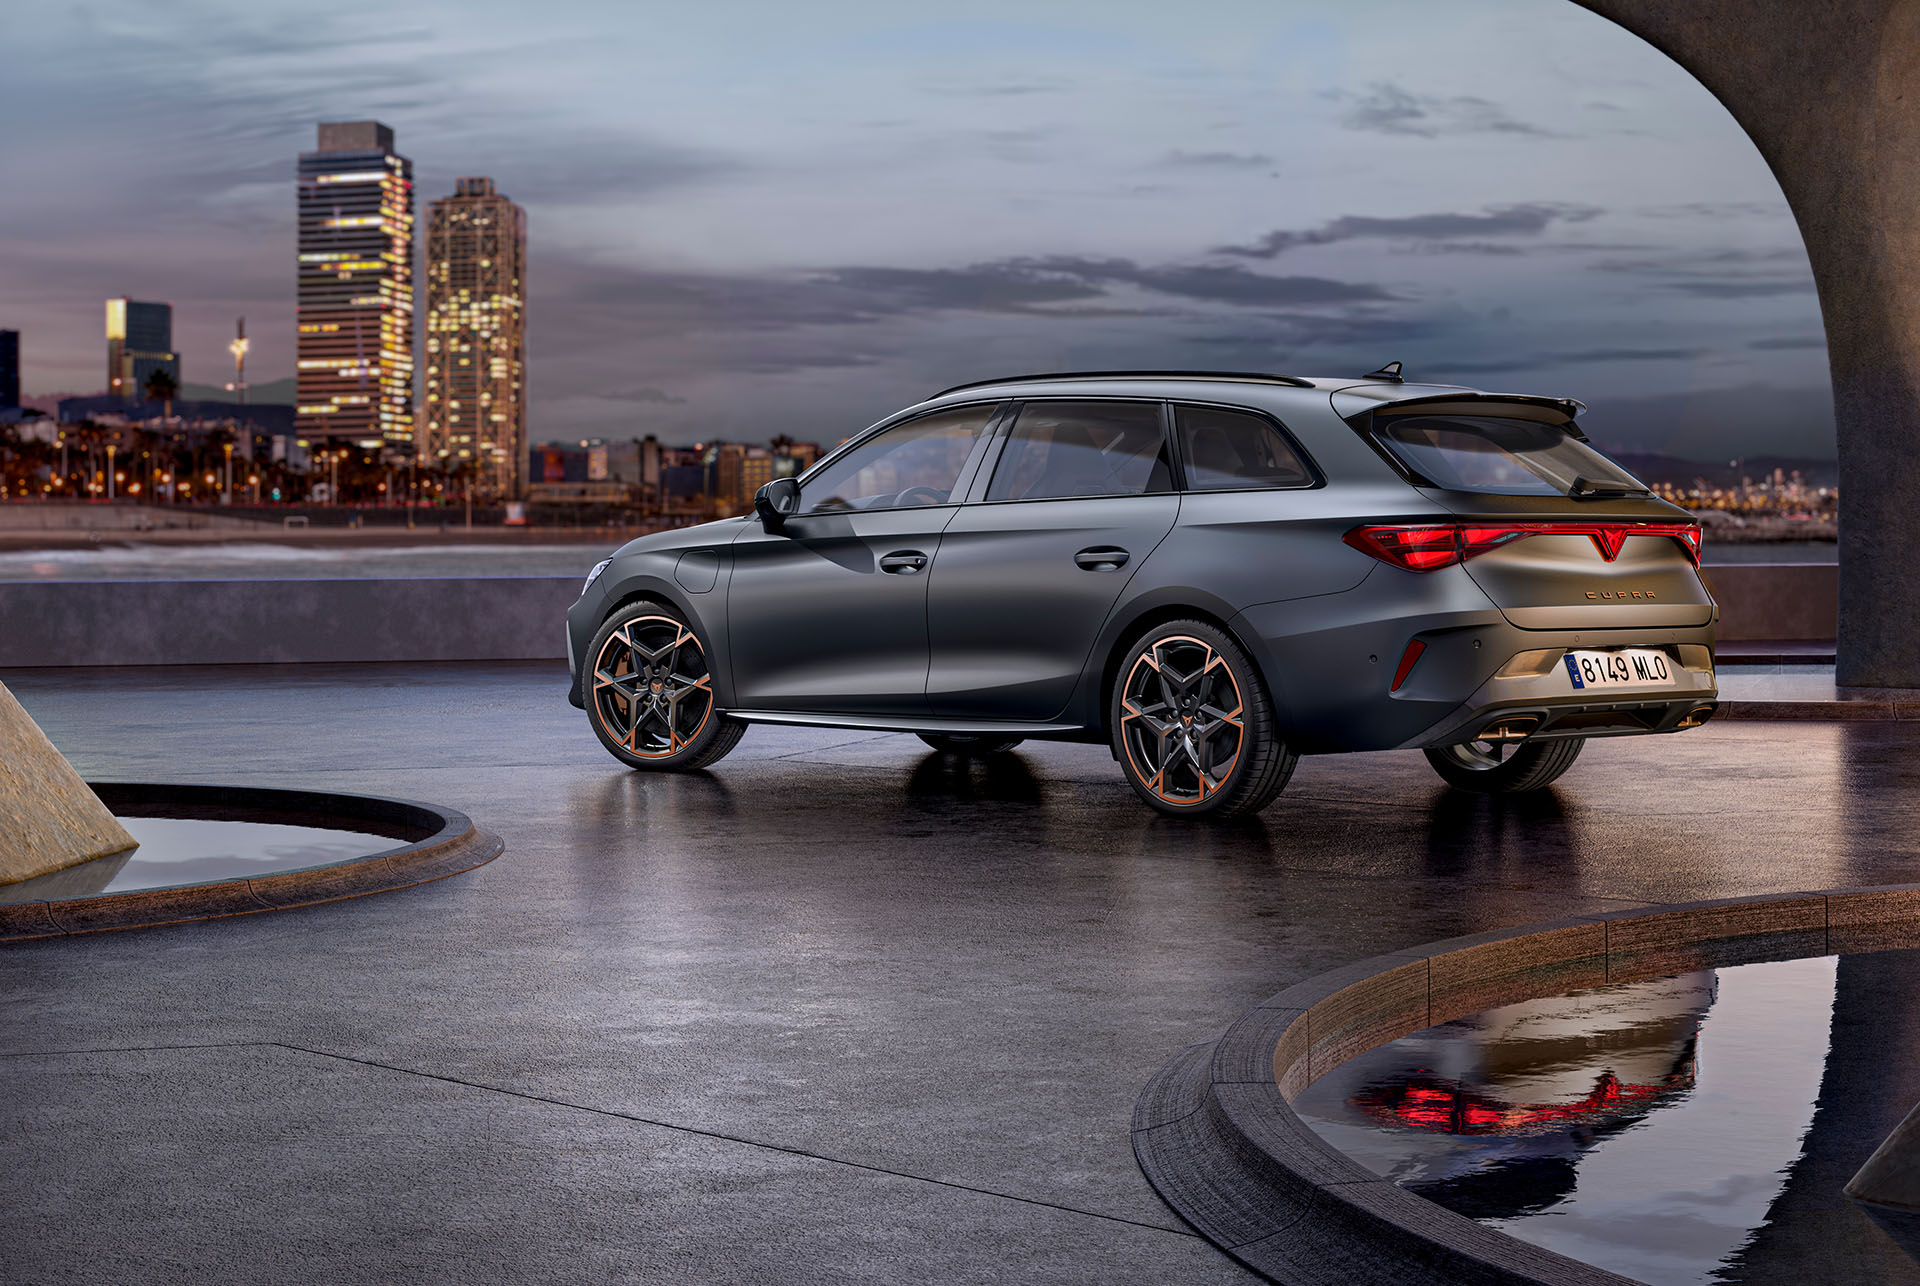 New cupra leon sportstourer 2024 technology parked on cement, structure with glowing edges, overlooking a city skyline at dusk. The vehicle is shown in a matte grey finish with copper and black alloy wheels.